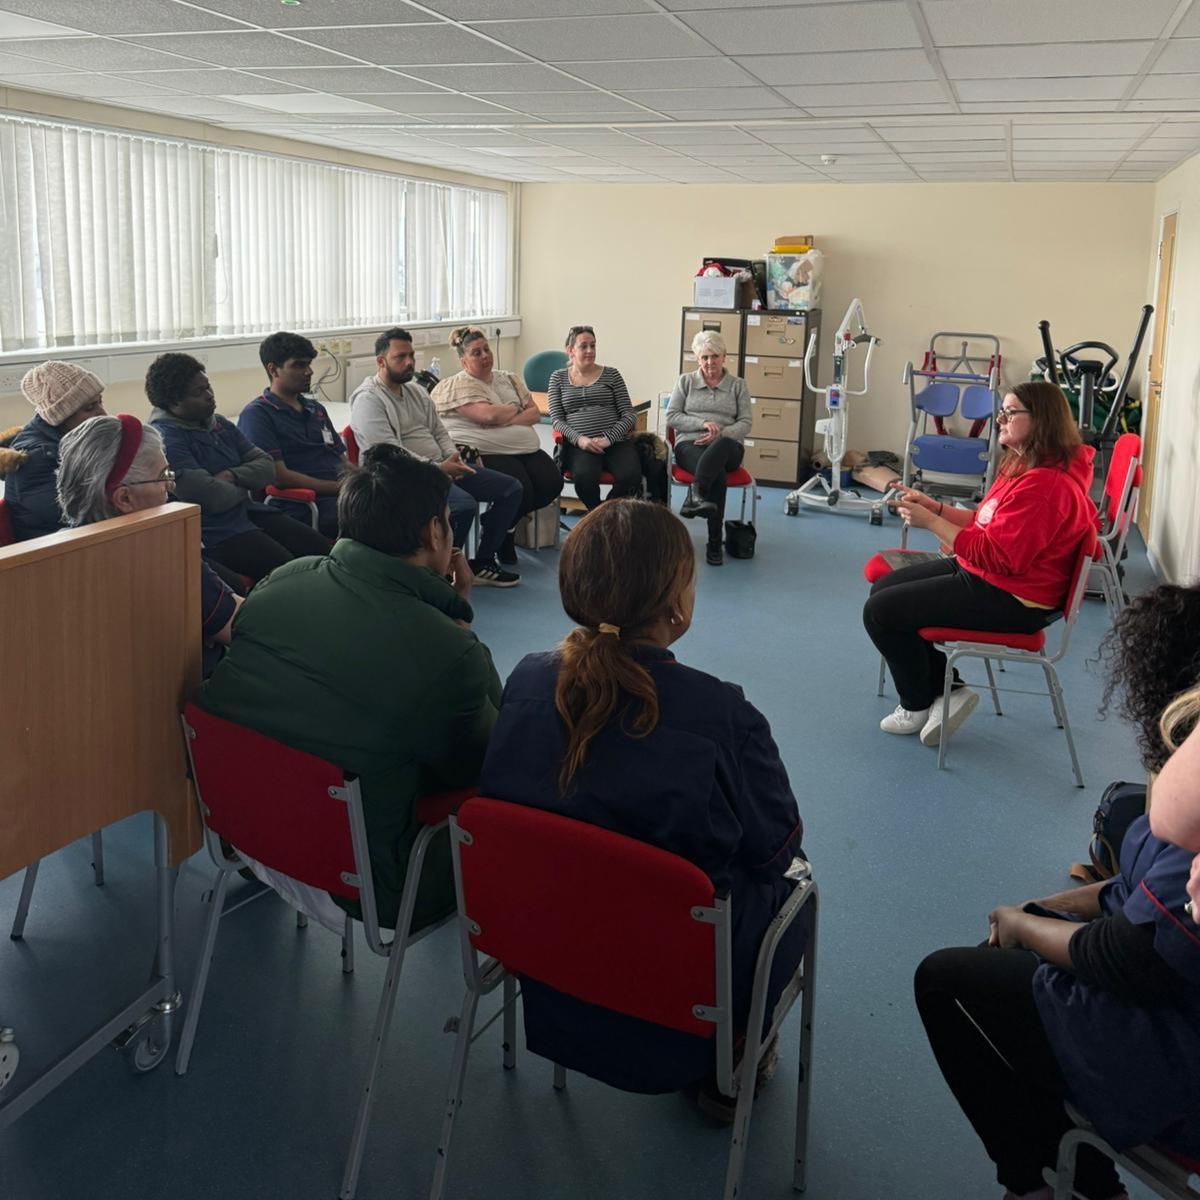 Our offices recently undertook crucial sepsis training from Melissa Mead MBE who lost her son William to sepsis and now works for The UK Sepsis Trust. 

The training was critical to understand, identify, and manage sepsis. 

#heathcare #homecareprovider #sepsis #training